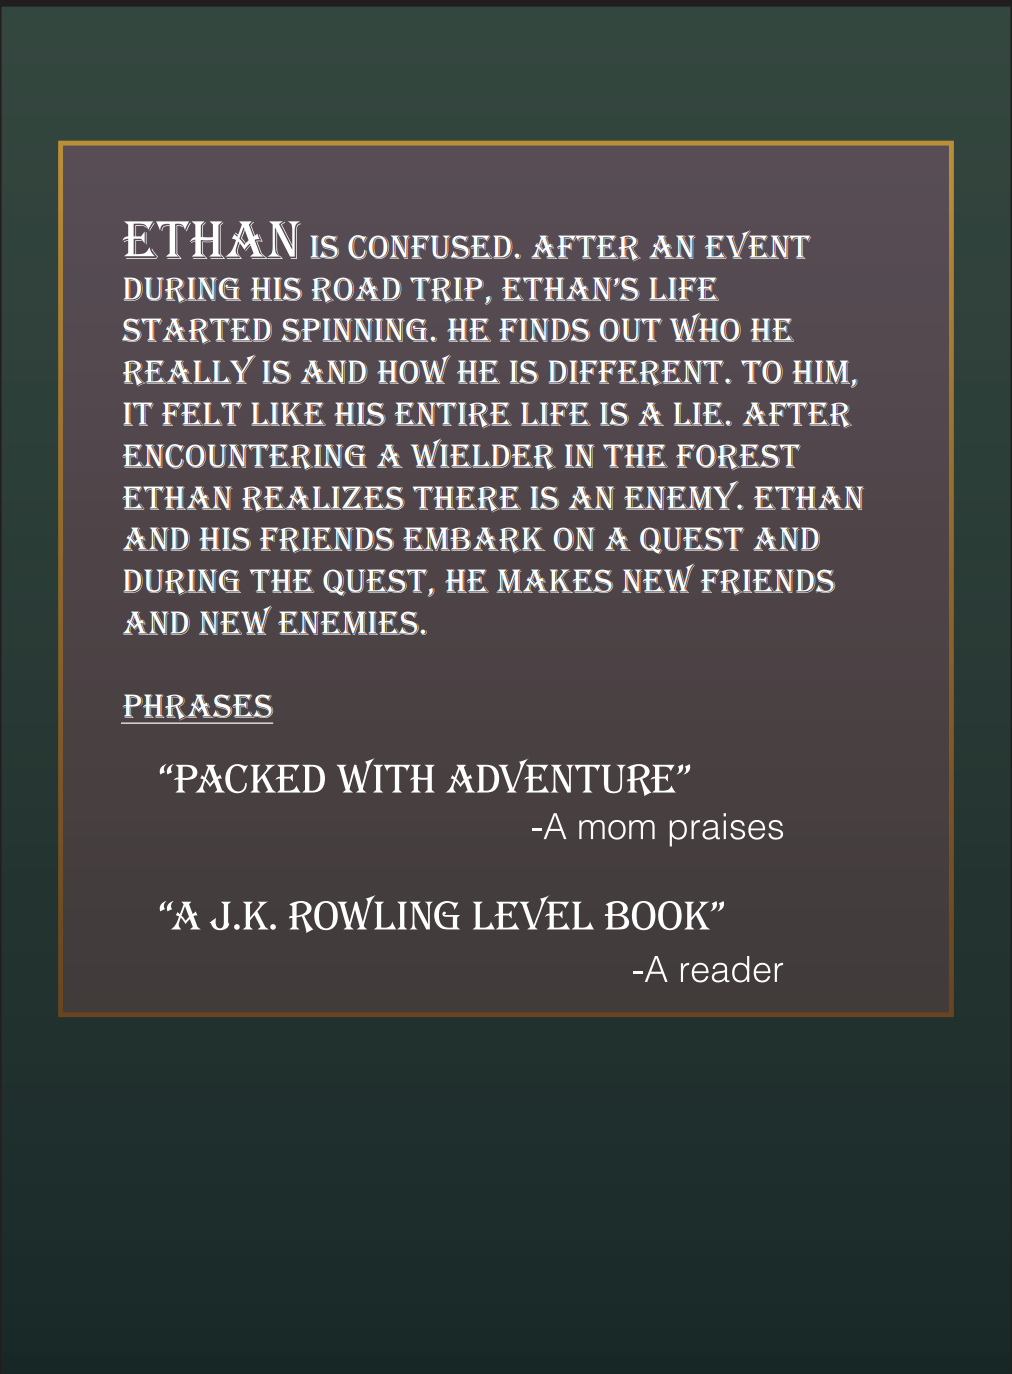 Ethan Anderson and the Wielders- Book 1